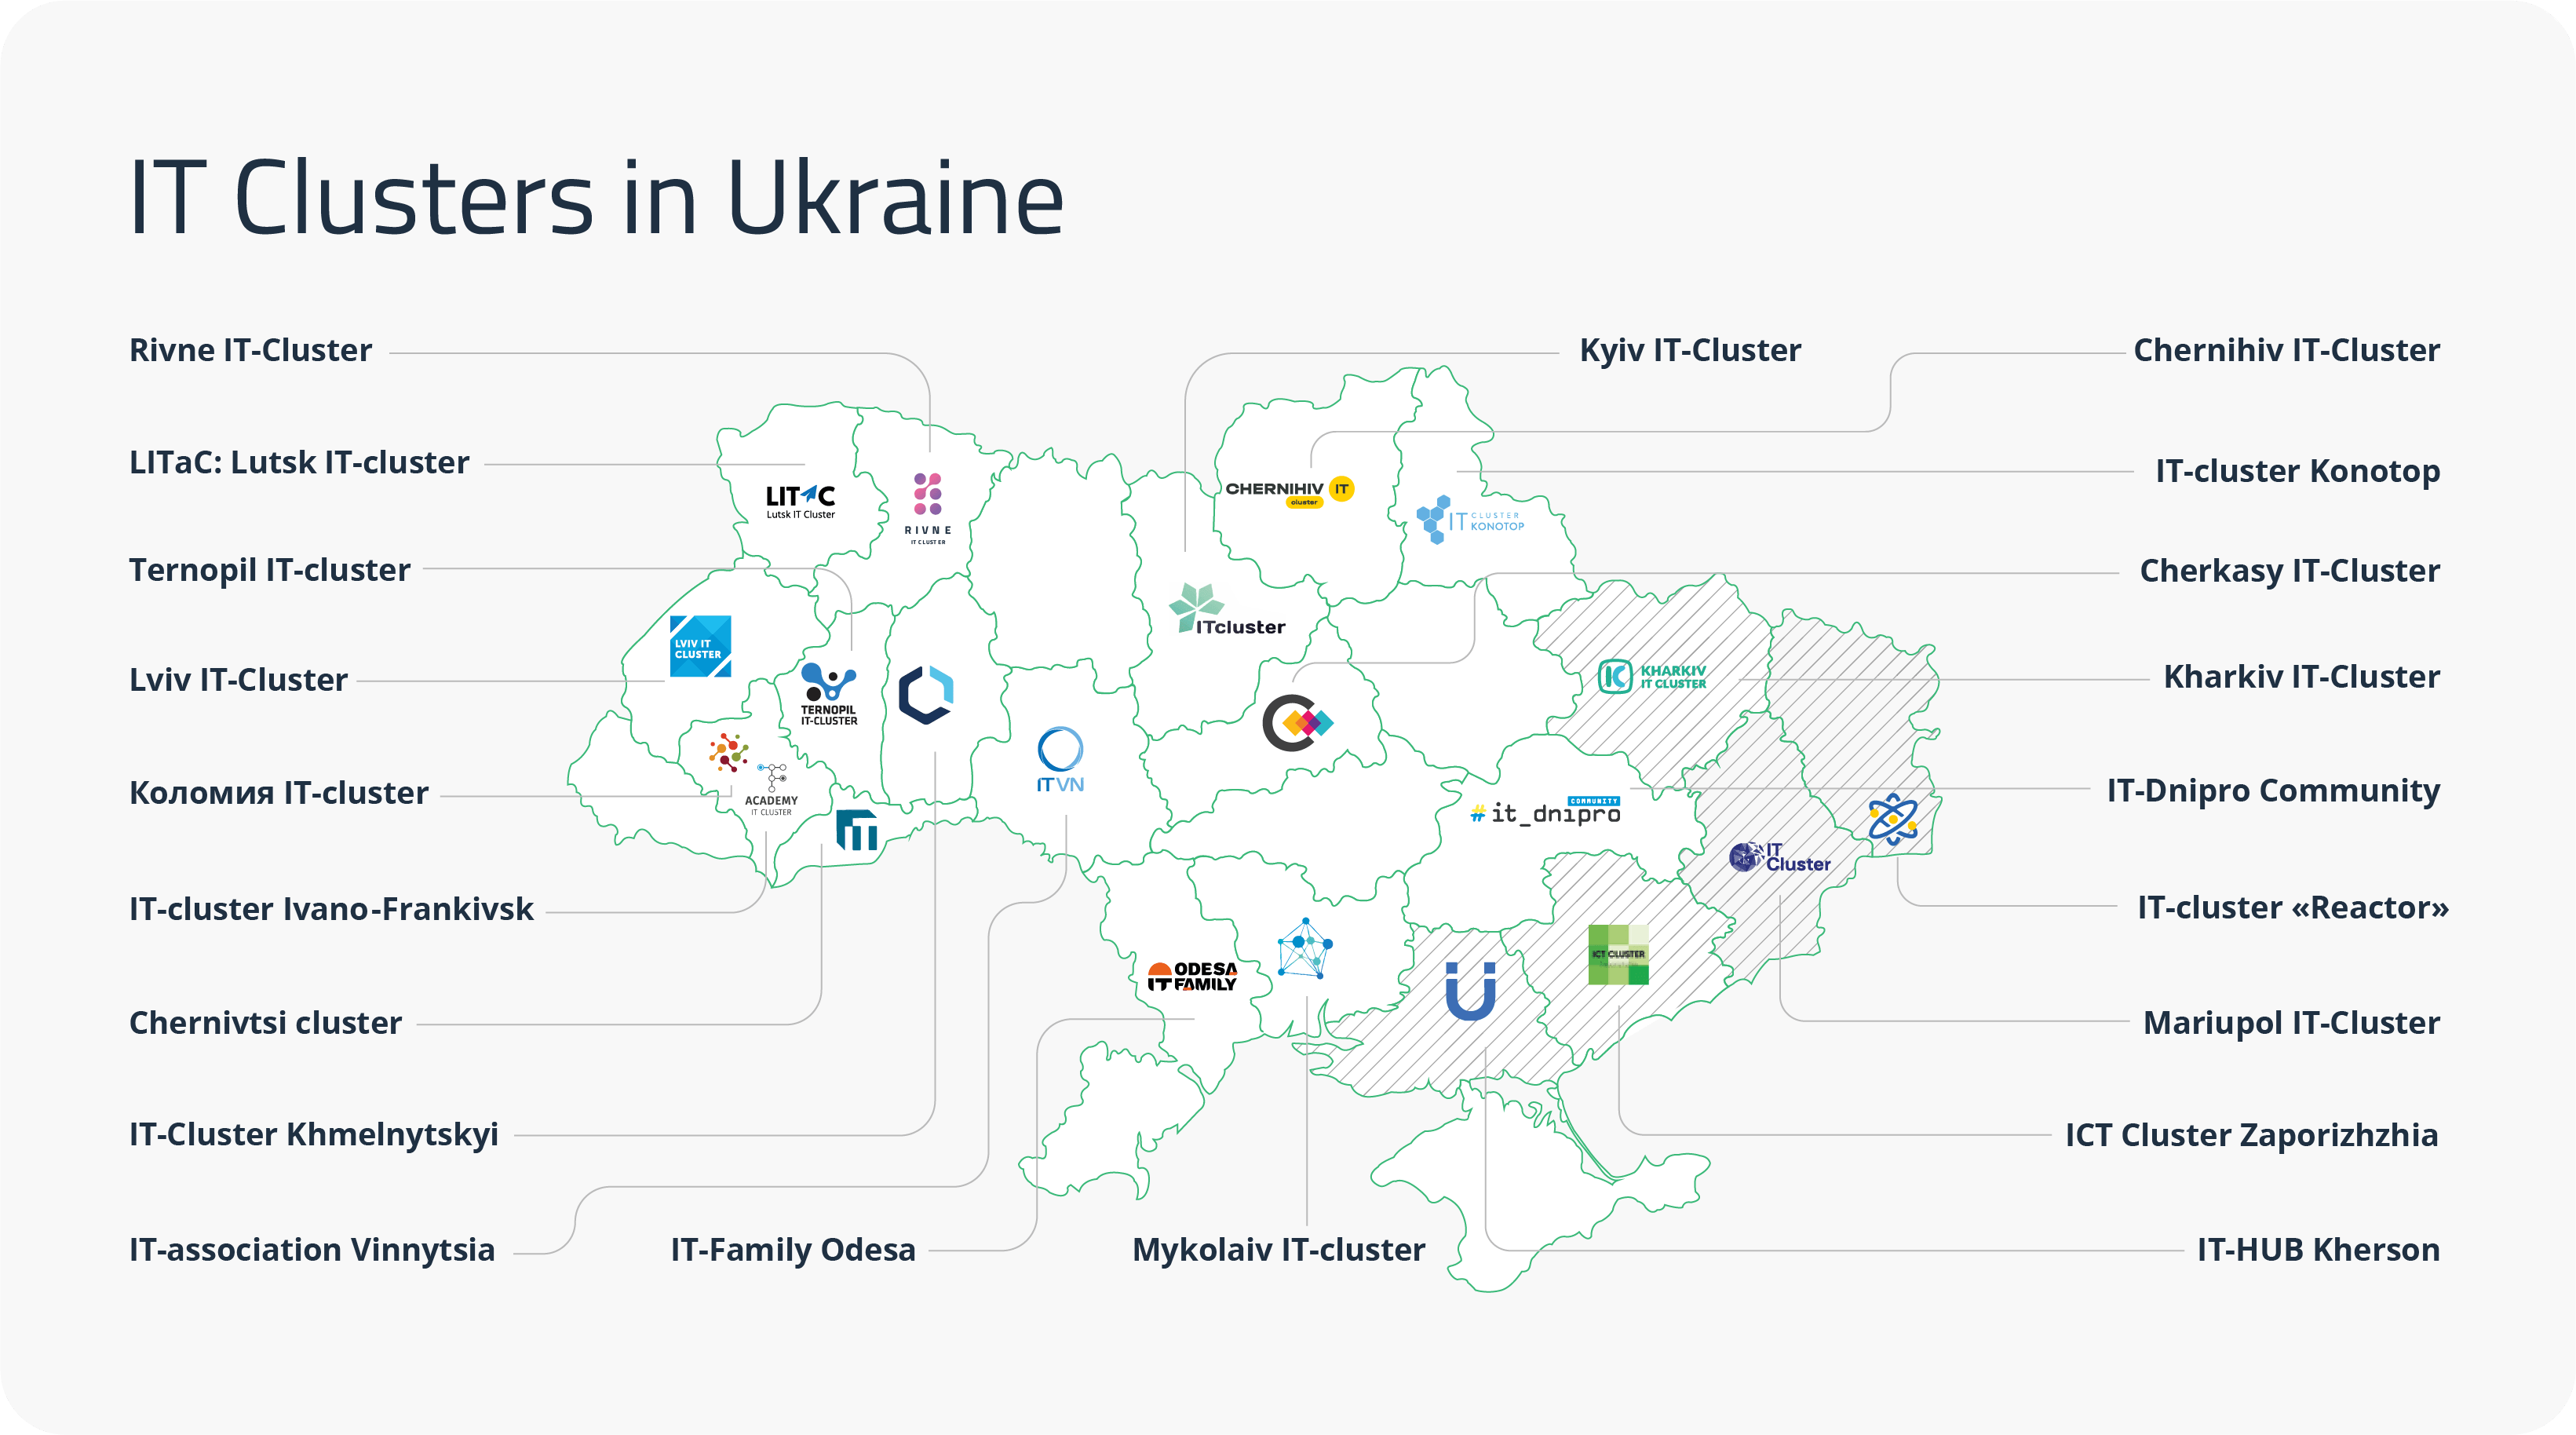 IT clusters in Ukraine to hire developers